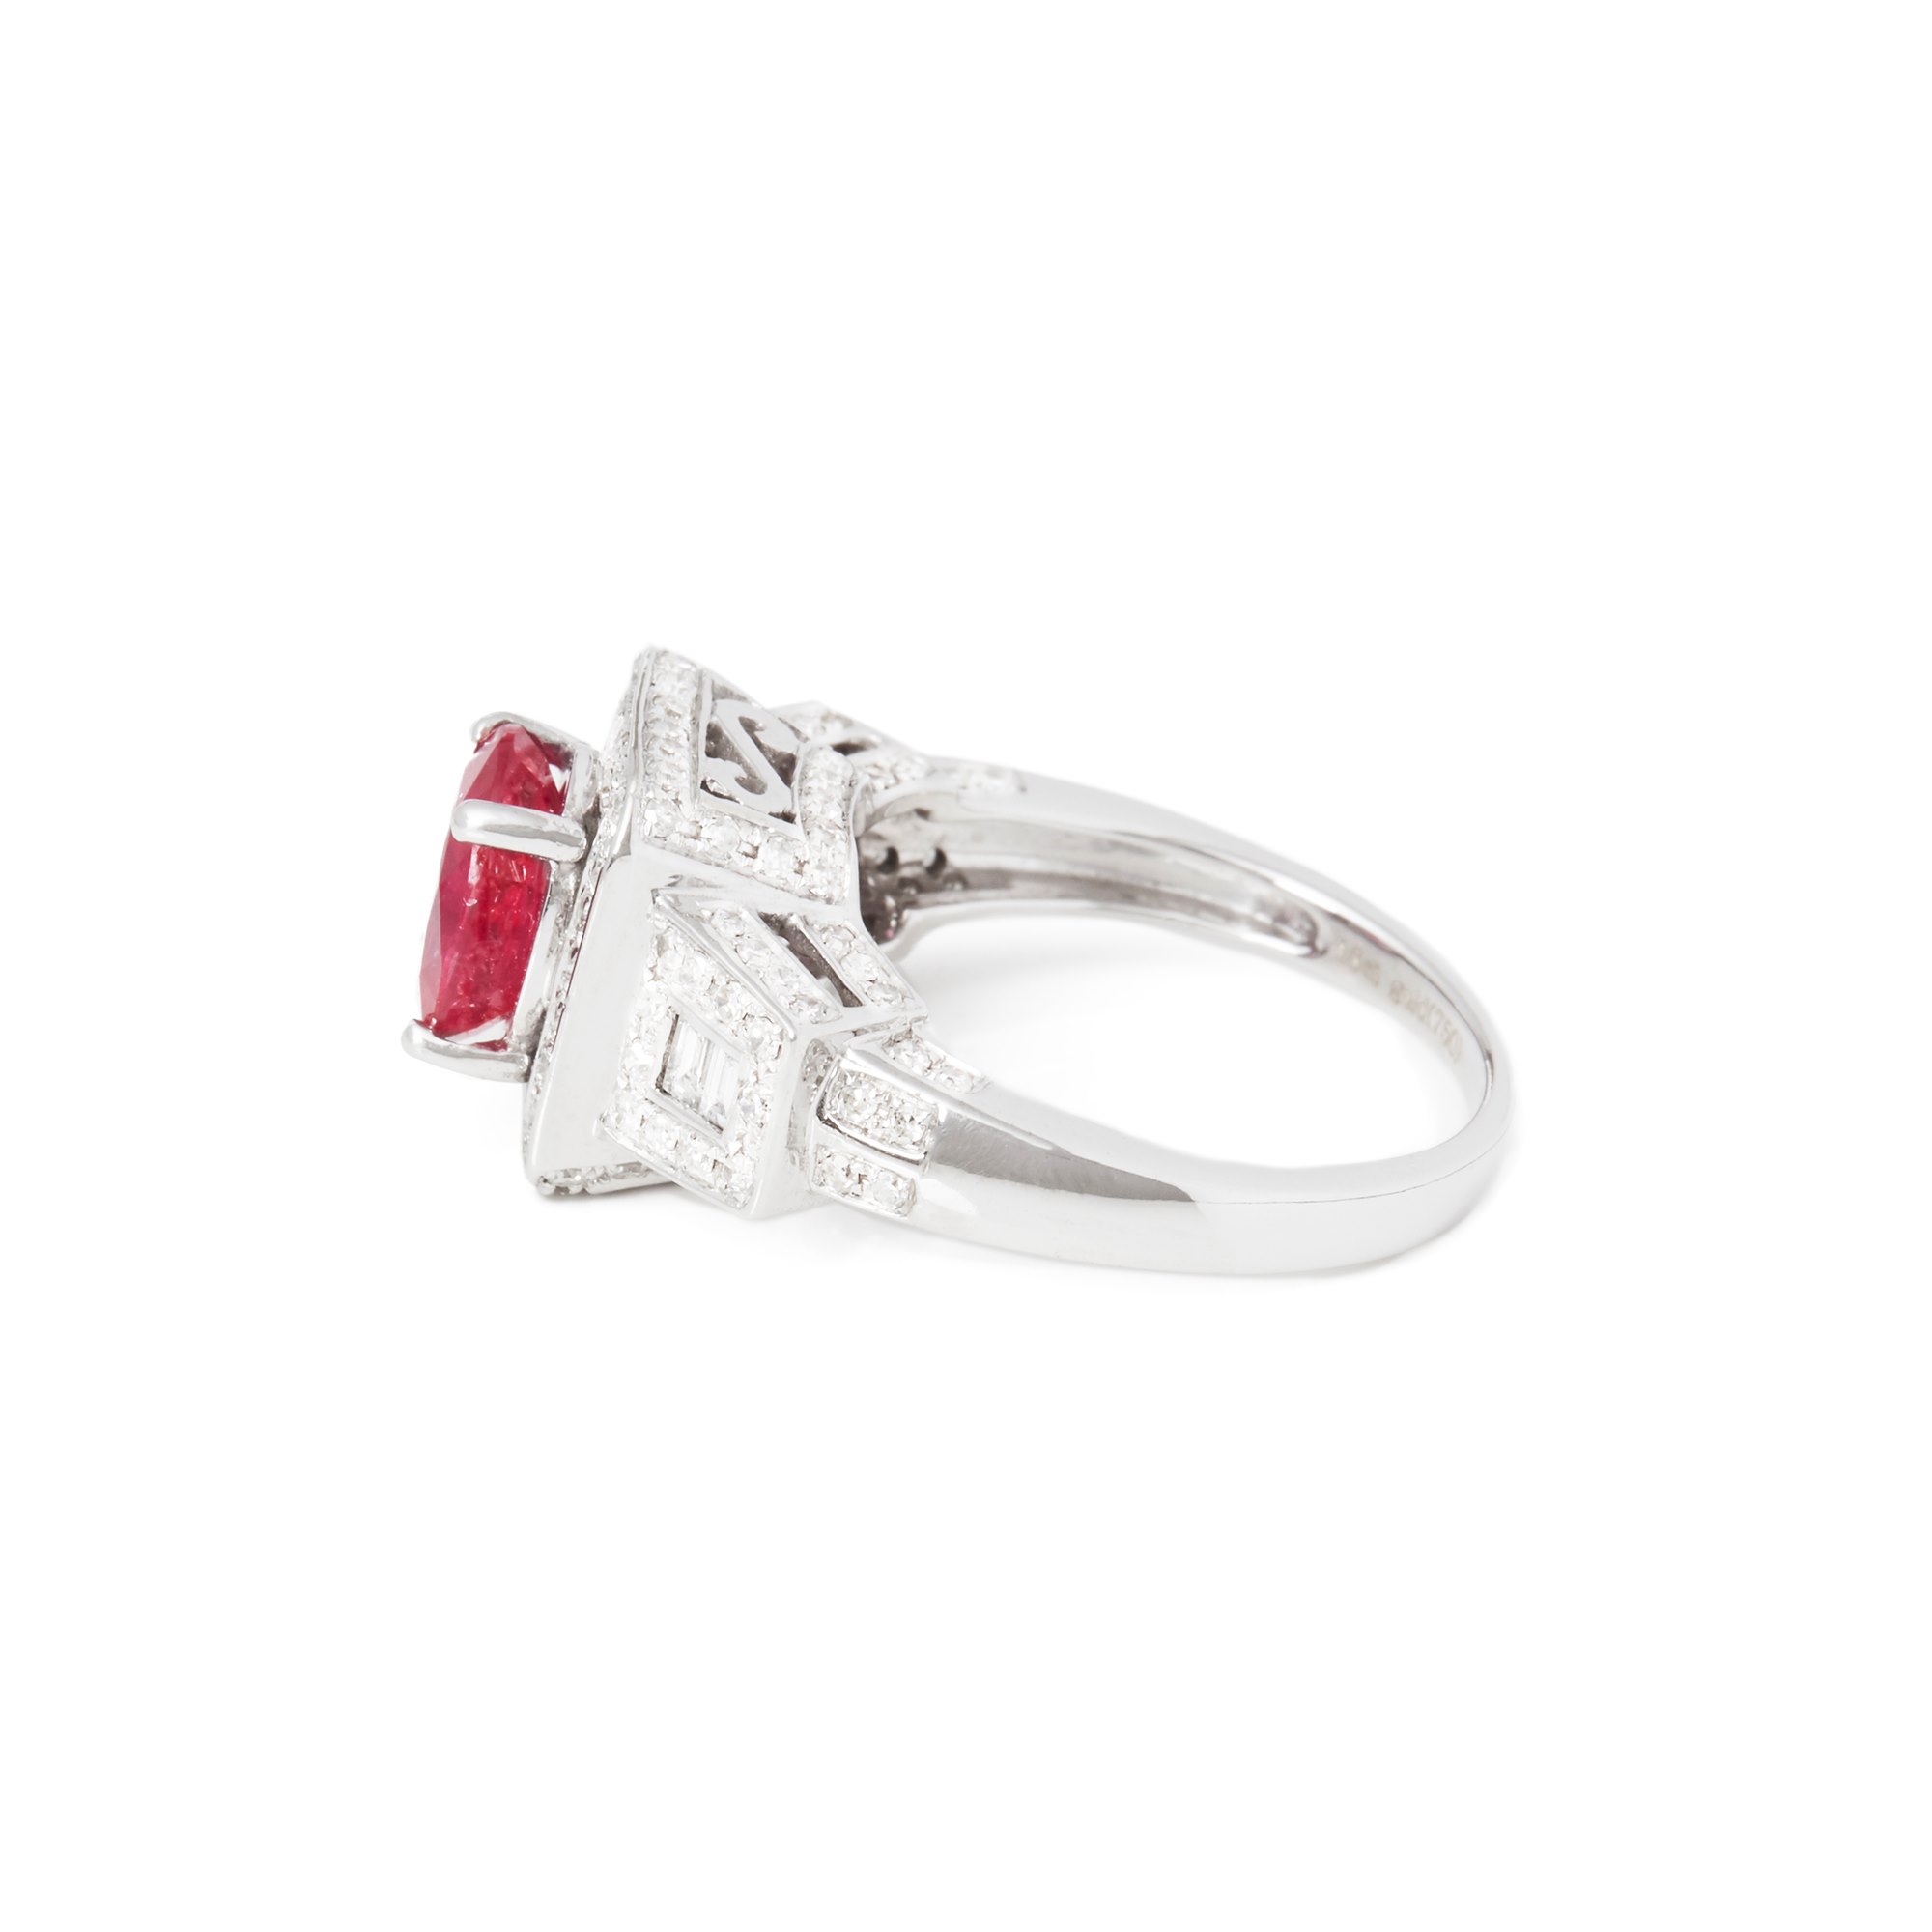 David Jerome Certified 2.37ct Unheated Untreated Oval Cut Ruby and Diamond 18ct gold Ring